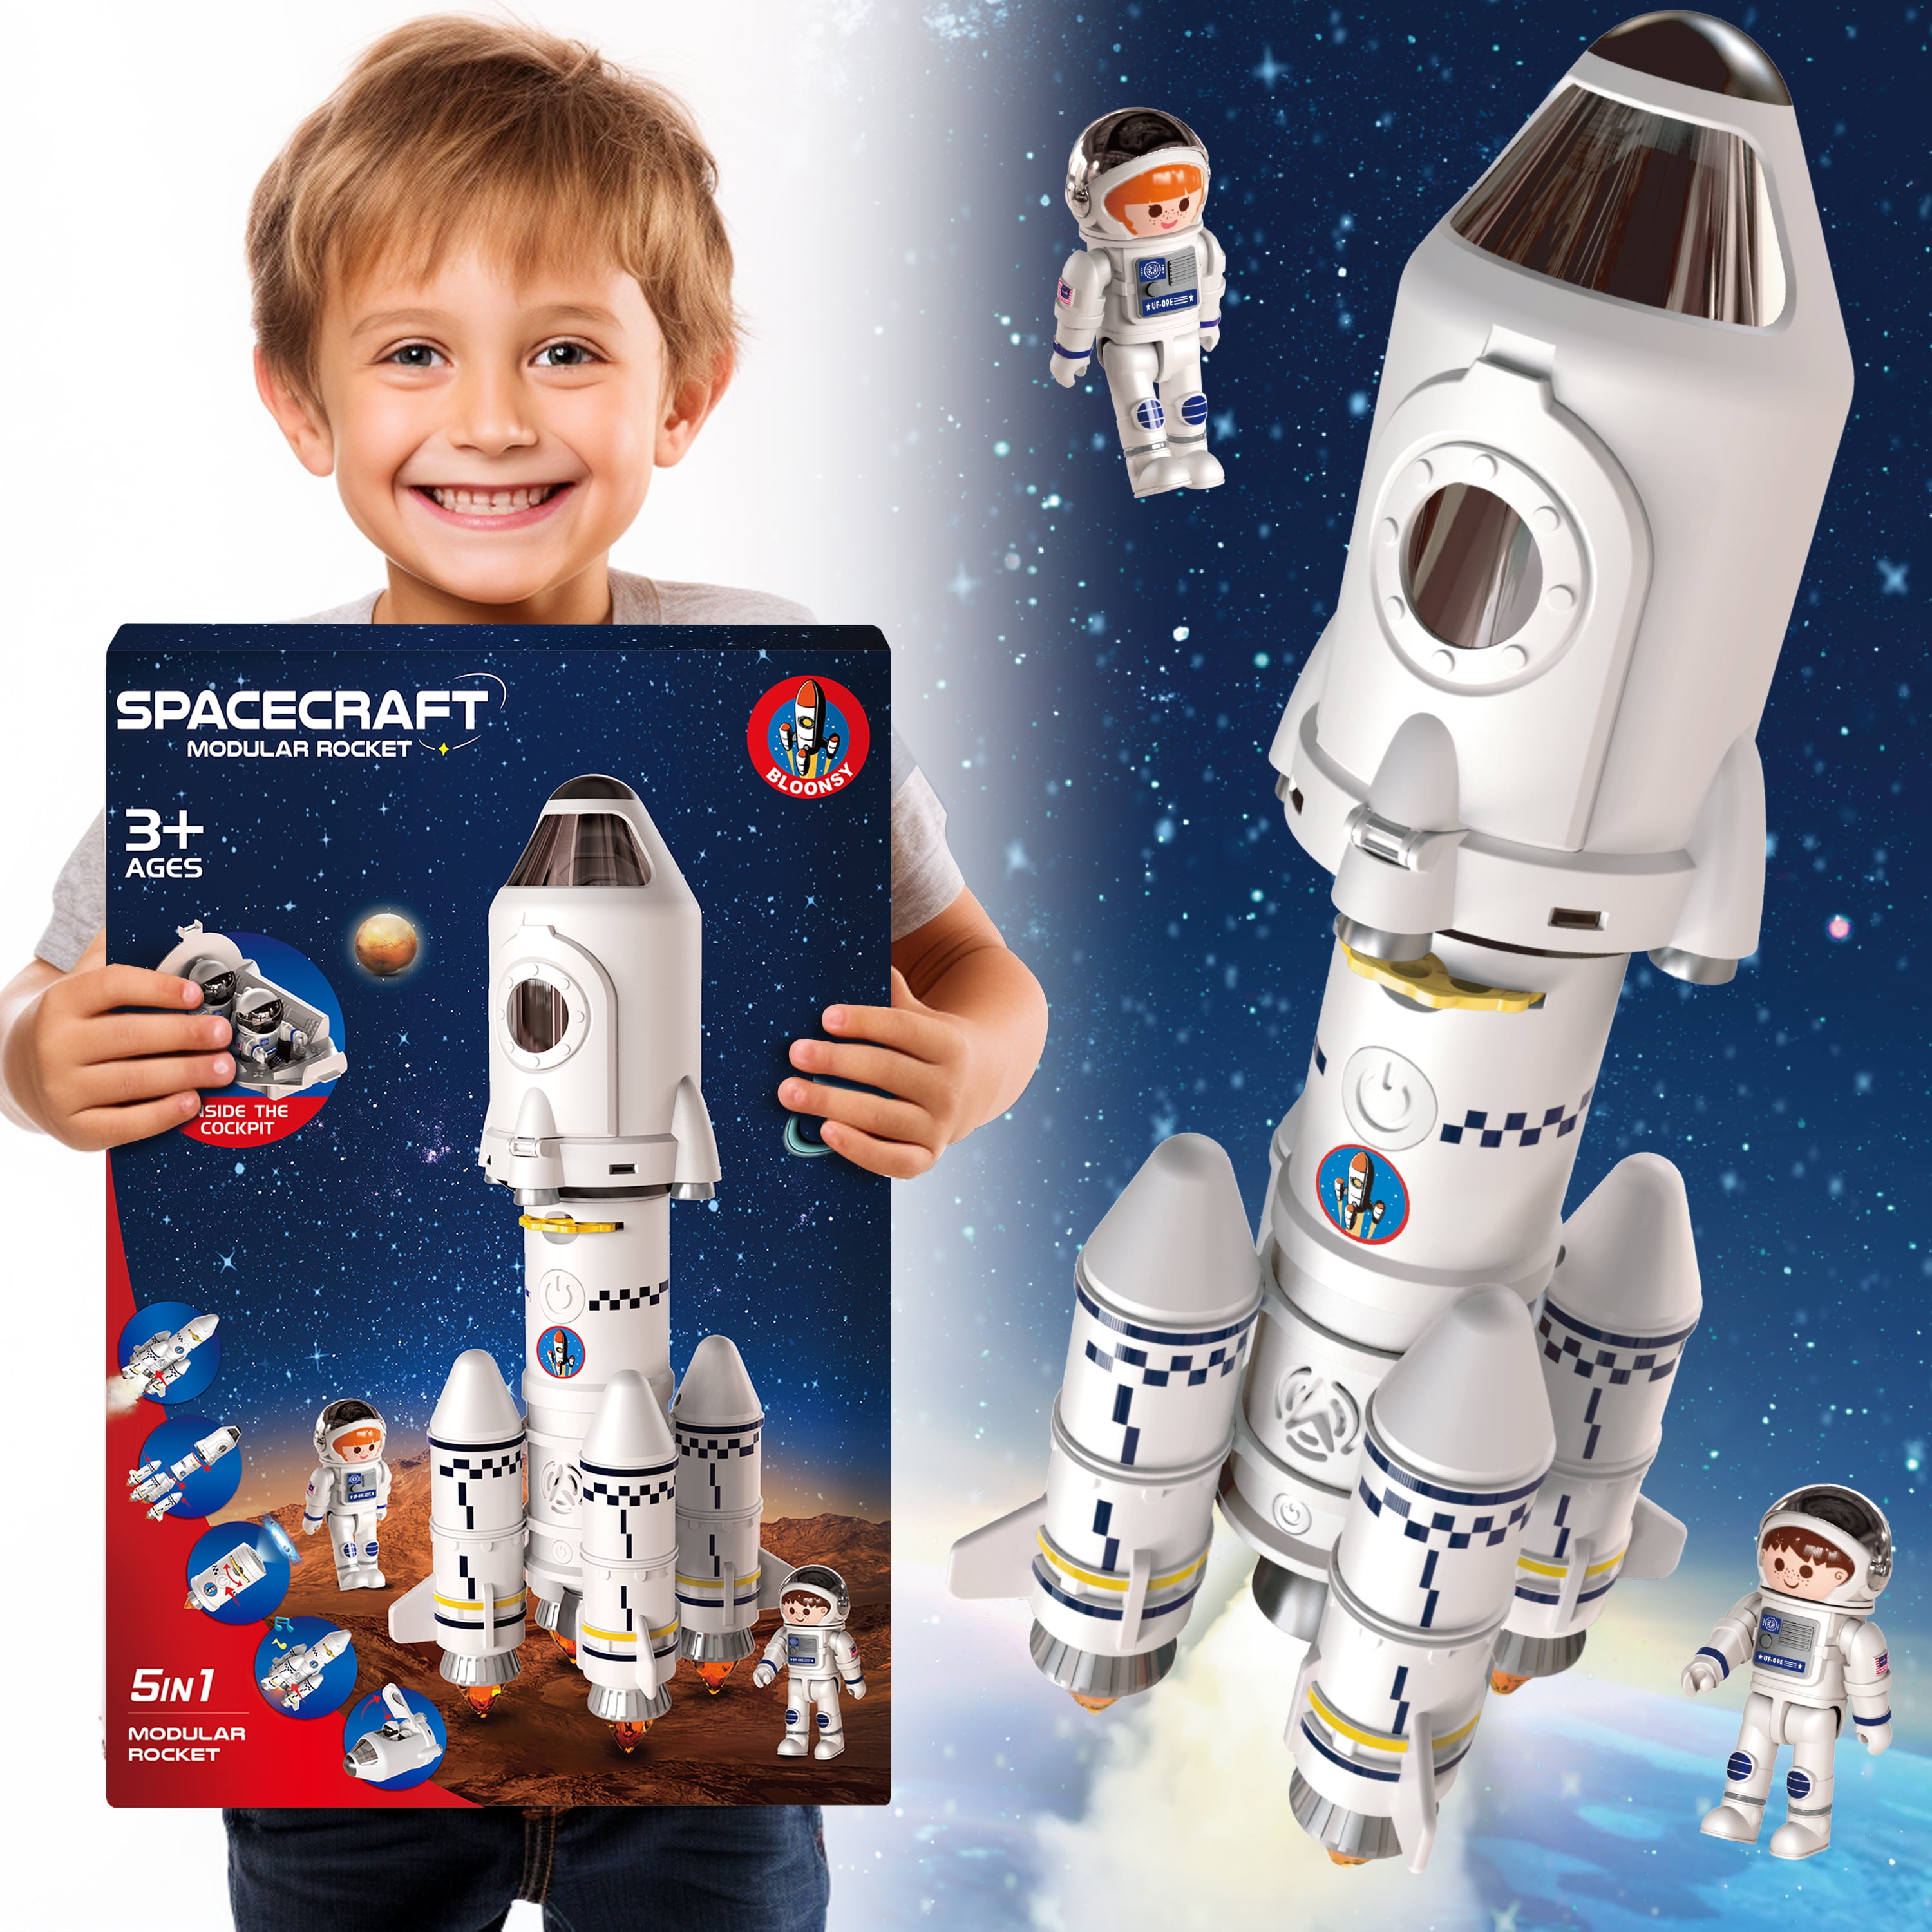 Bloonsy Rocket Ship Toys For Kids